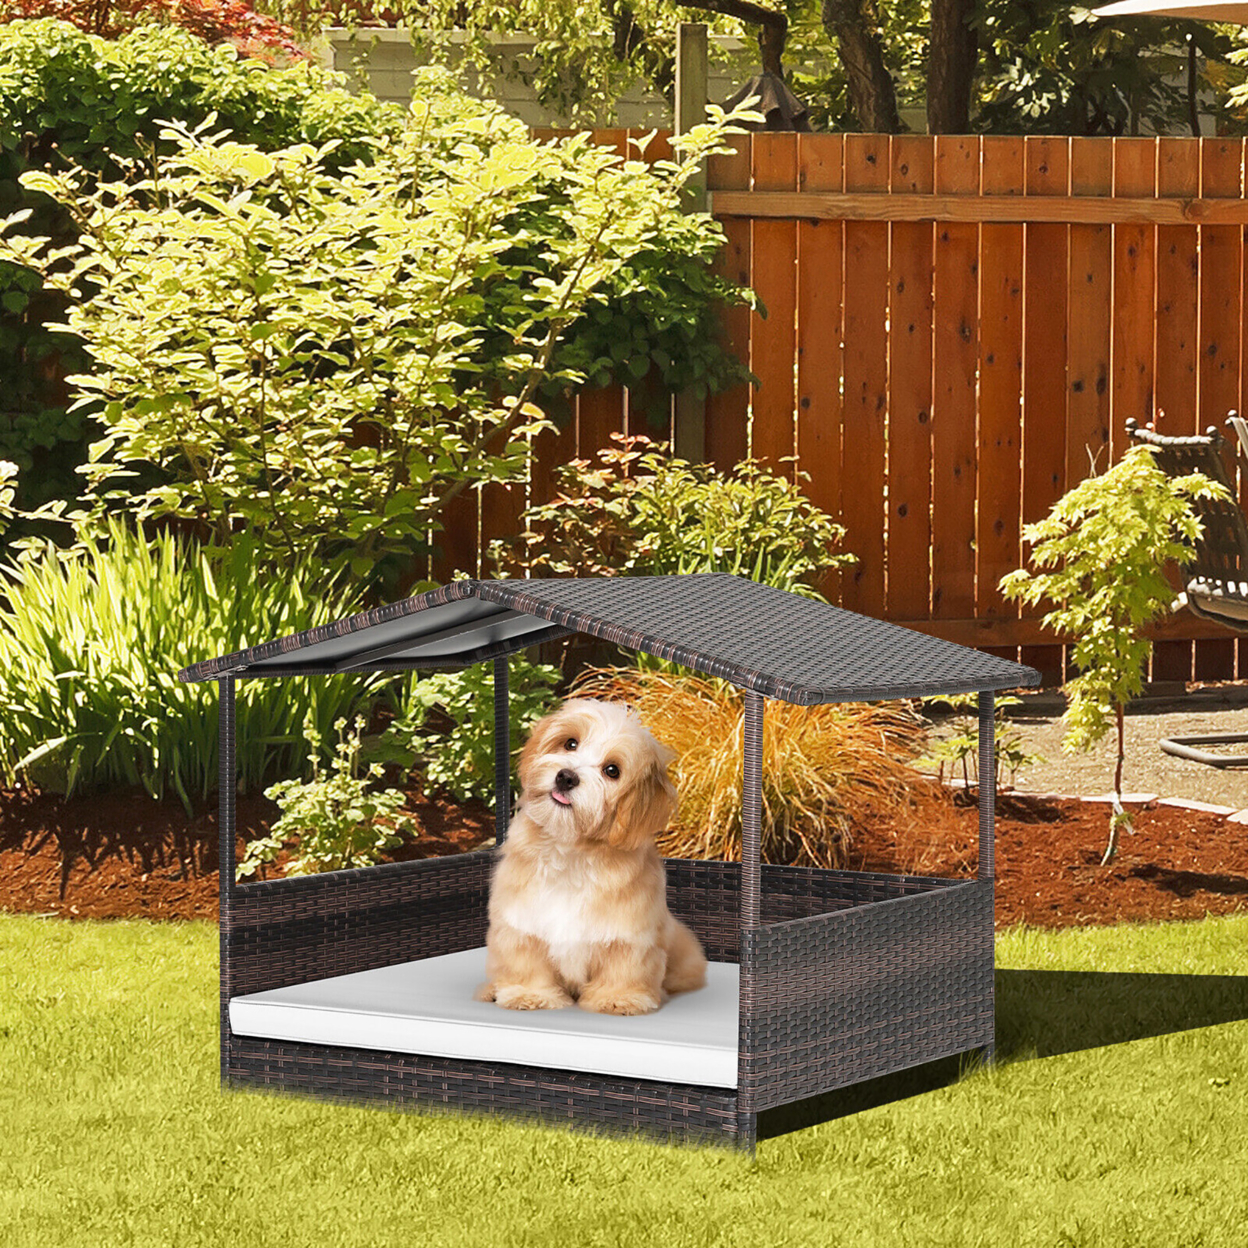 Wicker Dog House W/ Cushion Lounge Raised Rattan Bed For Indoor/Outdoor